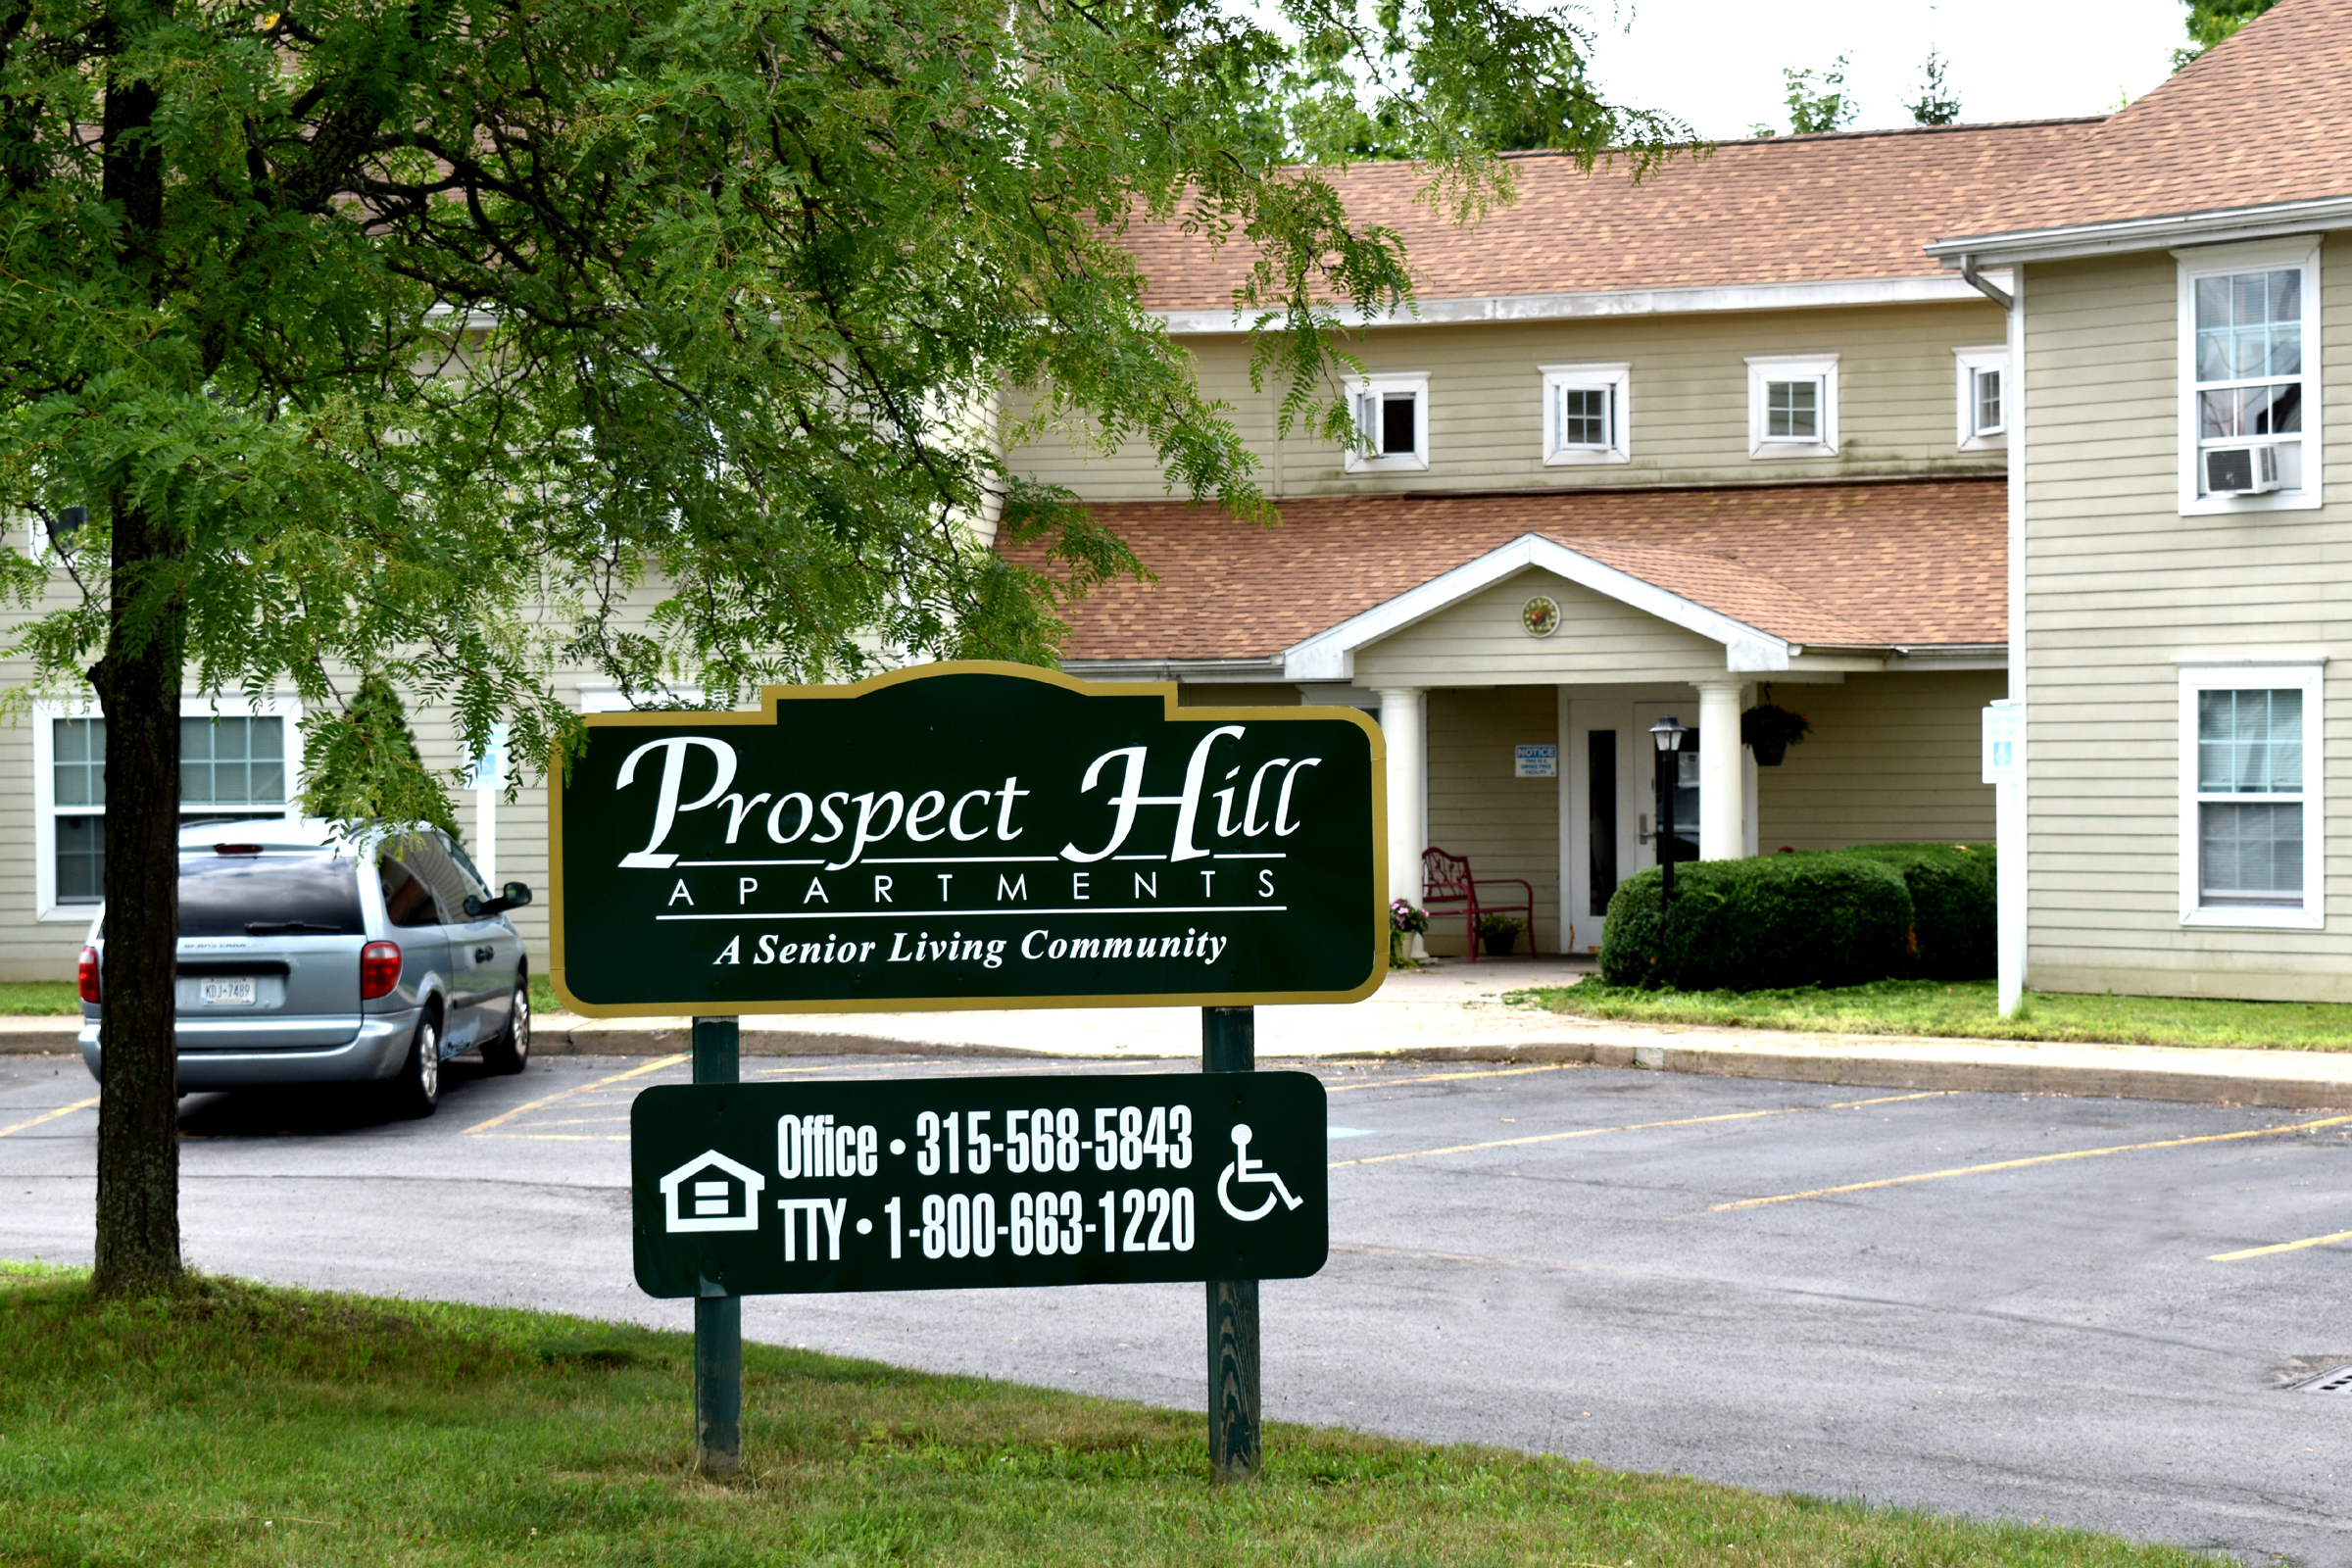 property management company client list syracuse ny welcome sign image of prospect hill apartments